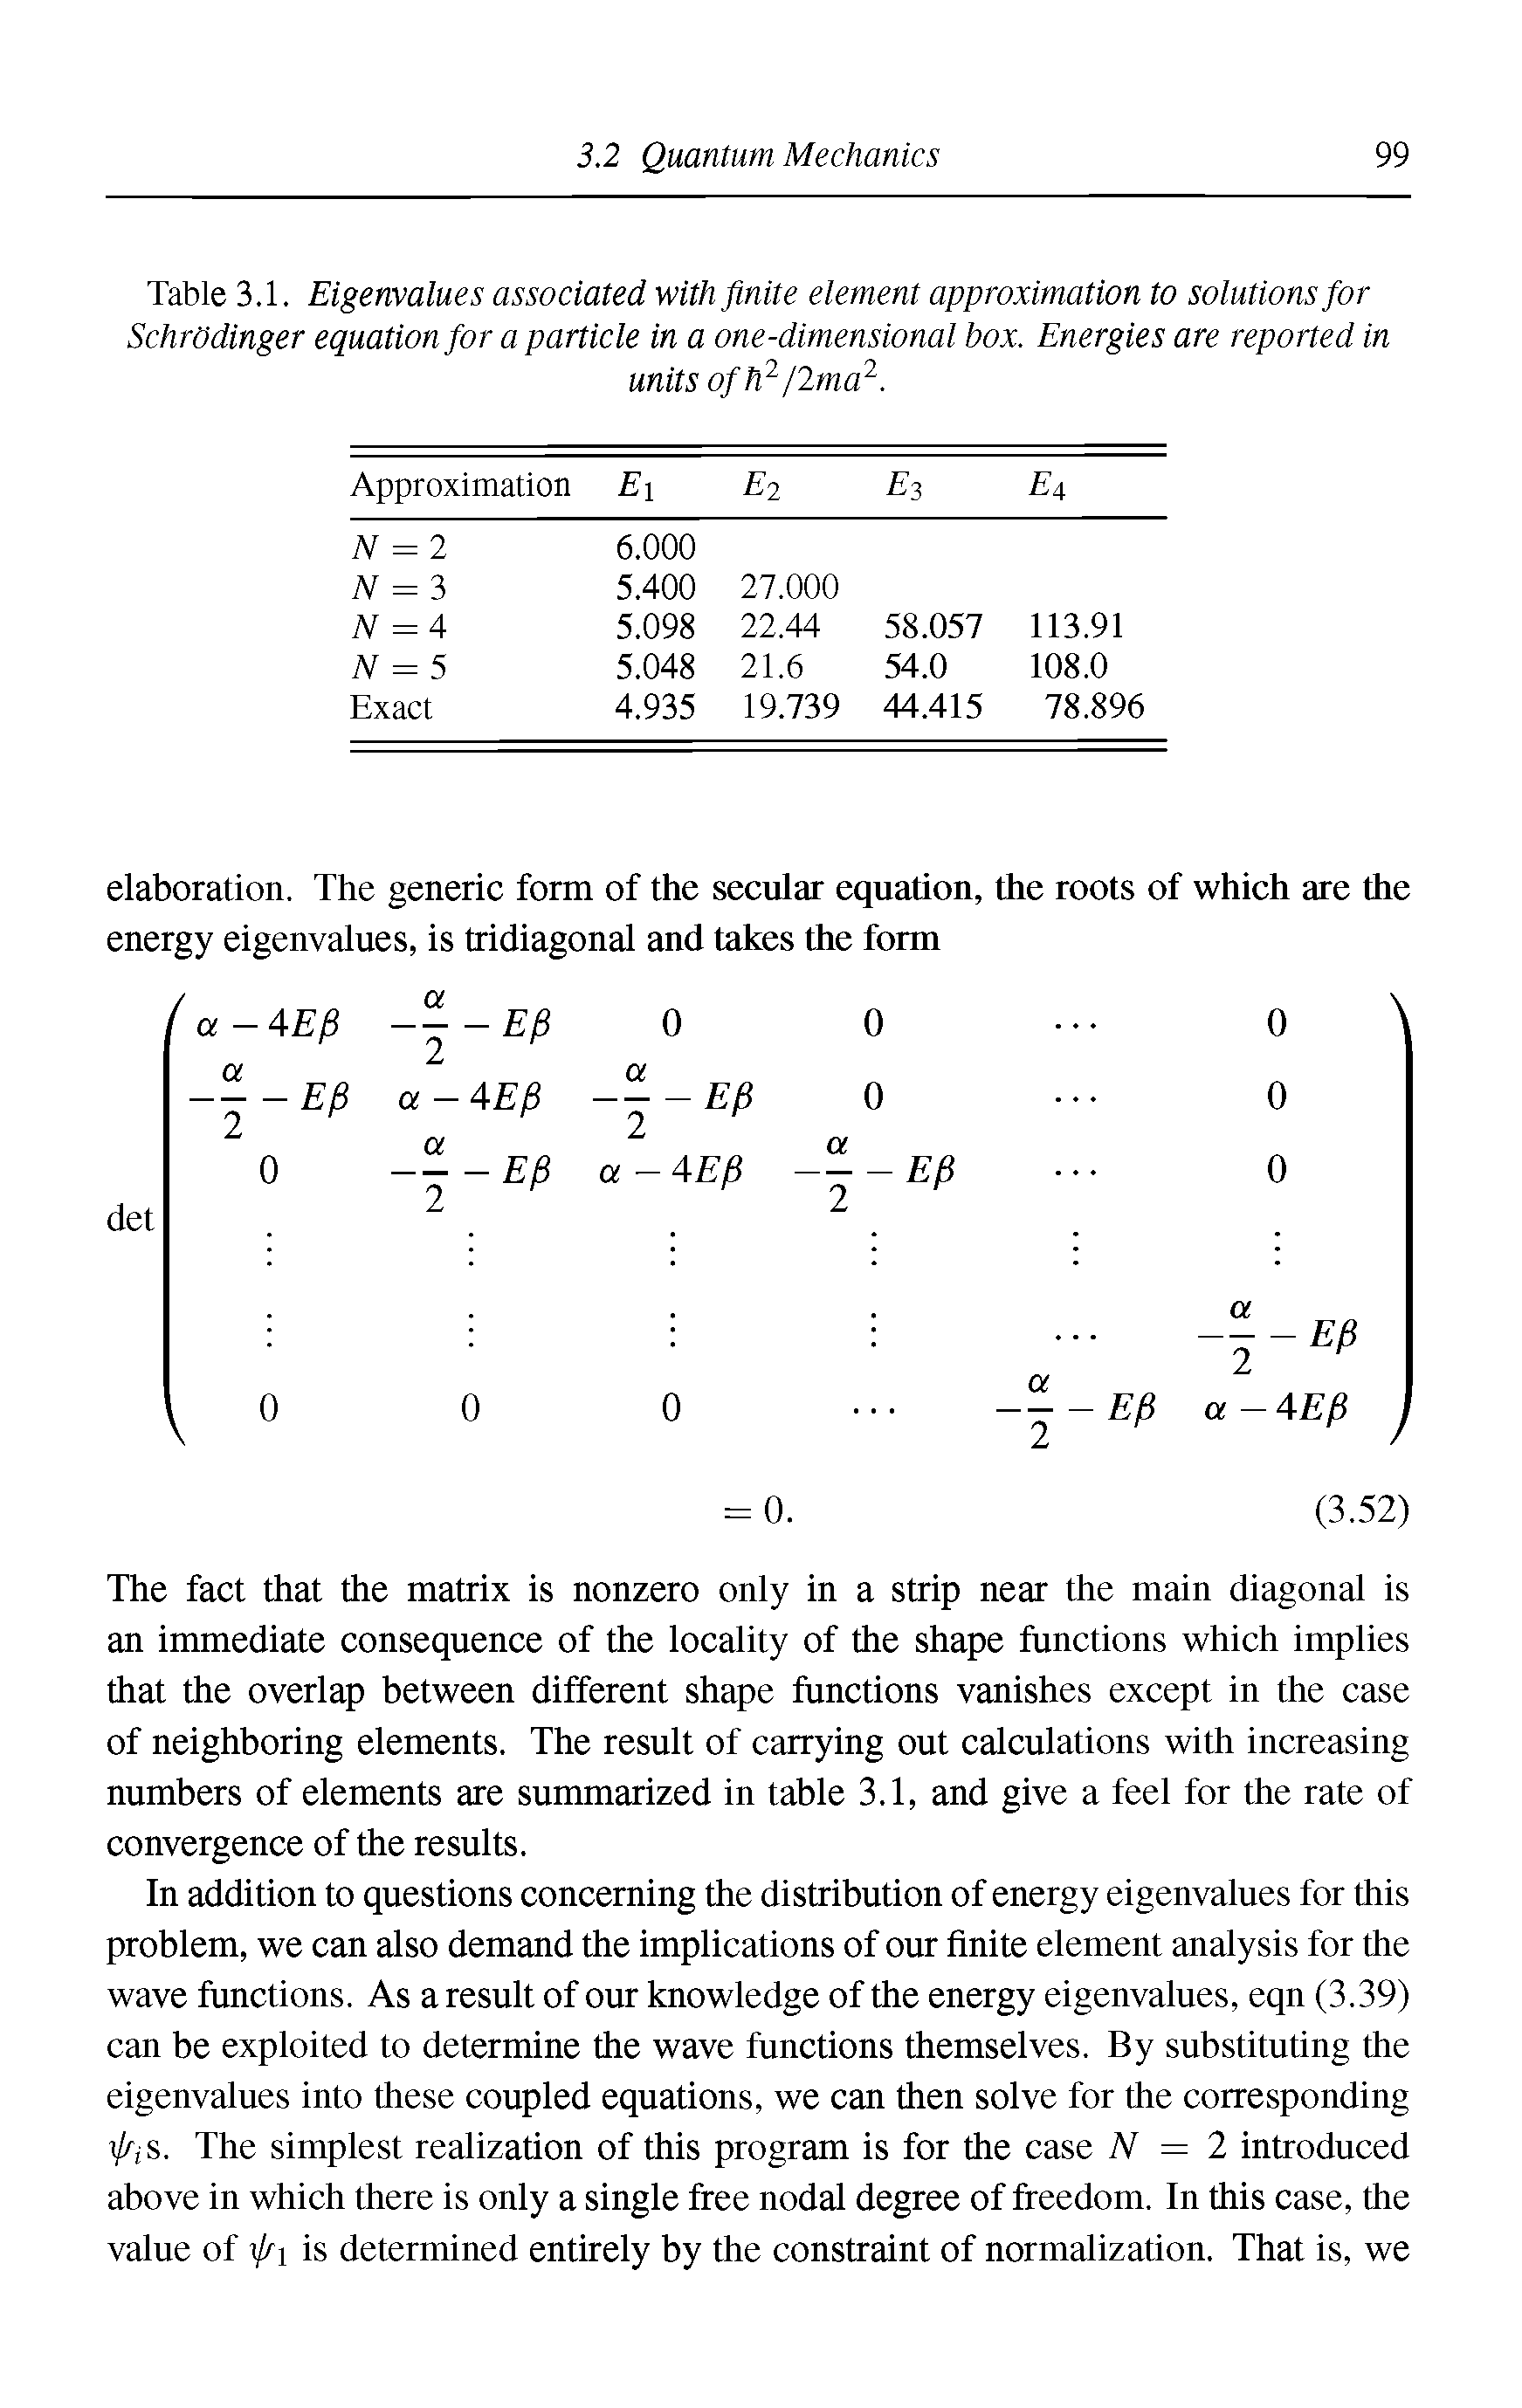 Table 3.1. Eigenvalues associated with finite element approximation to solutions for SchrOdinger equation for a particle in a one-dimensional box. Energies are reported in...